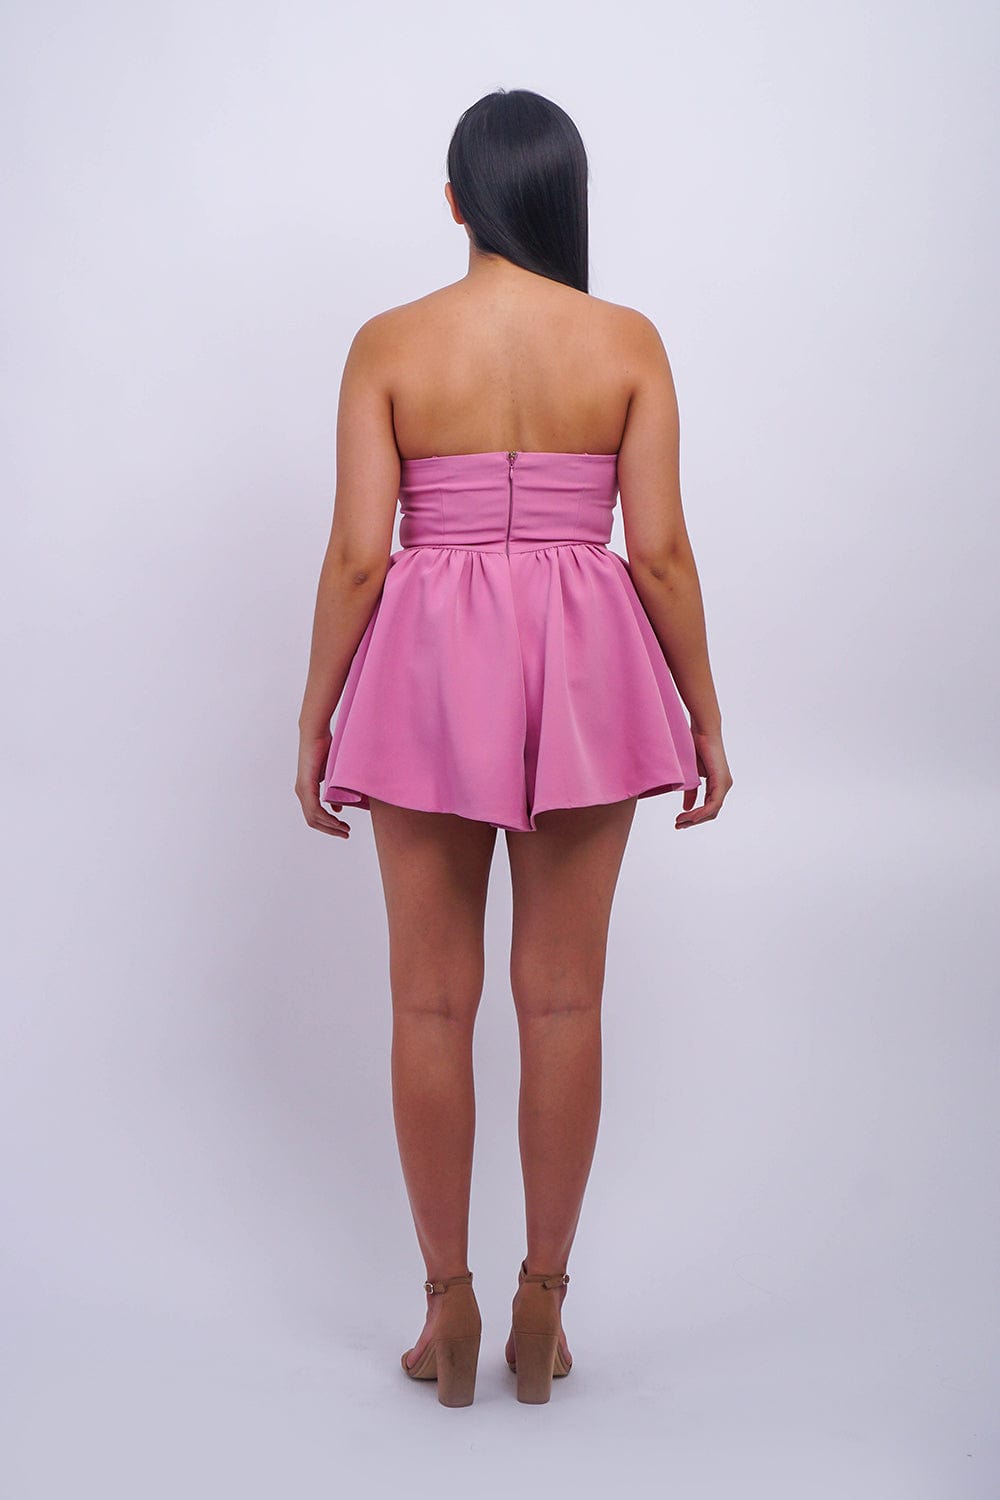 DCD JUMPSUITS & ROMPERS Sweet Pink Bow Strapless Romper